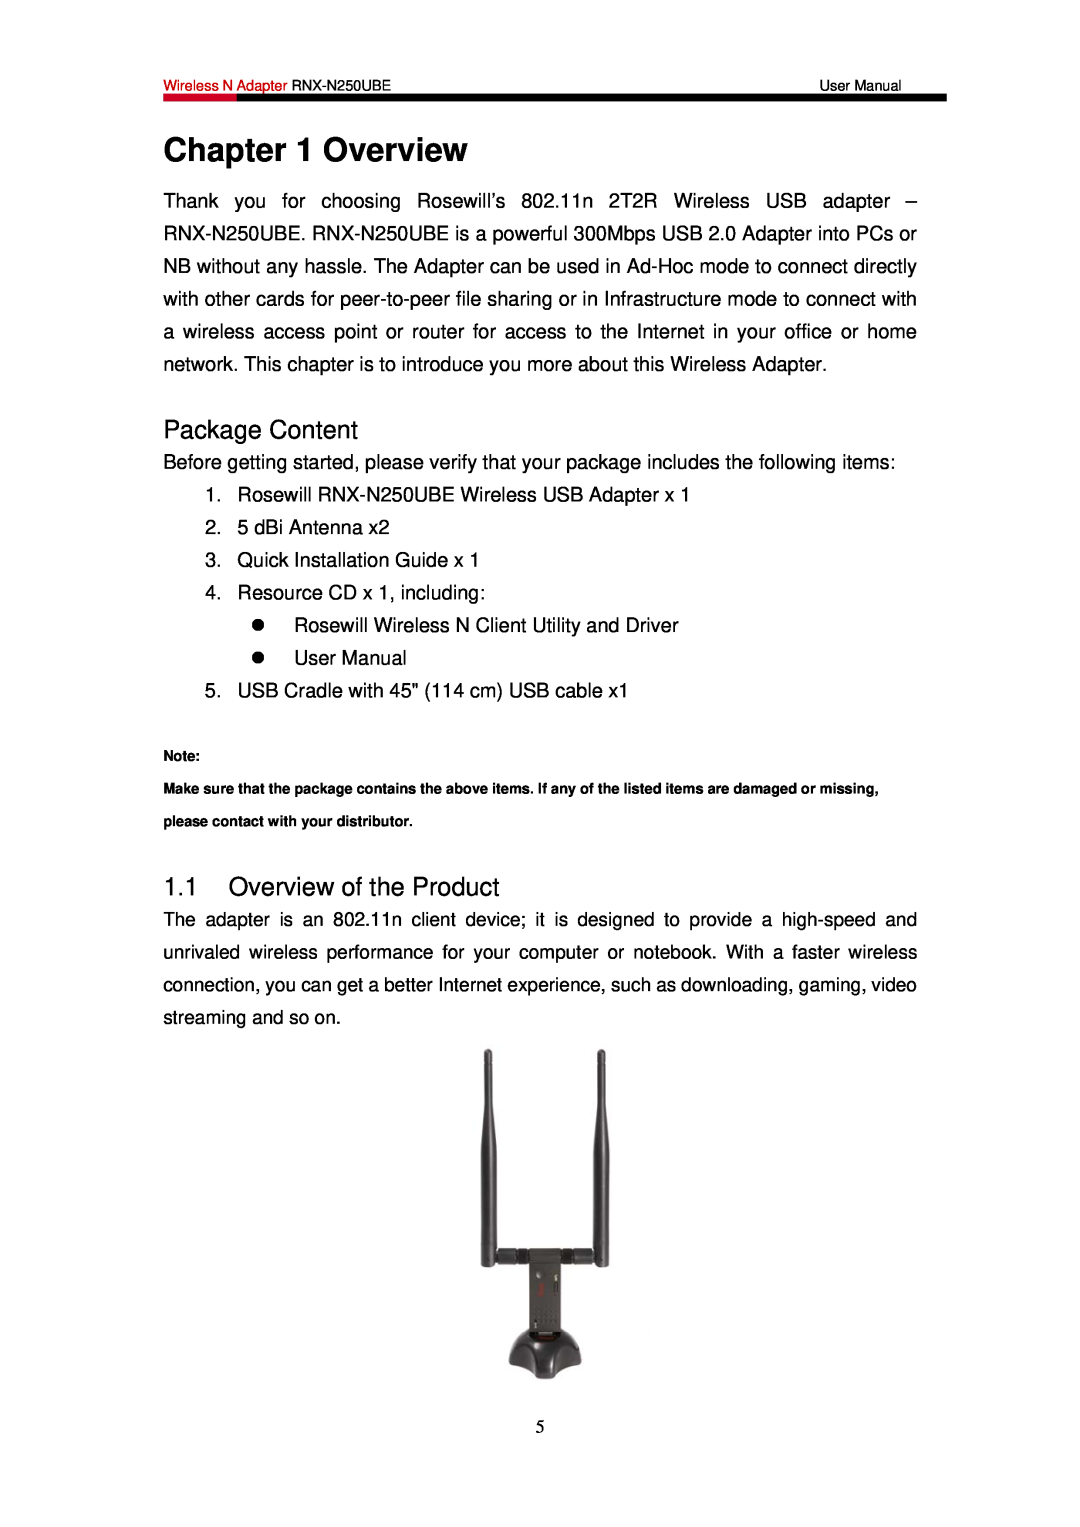 Rosewill RNX-N250UBE user manual Package Content, Overview of the Product 